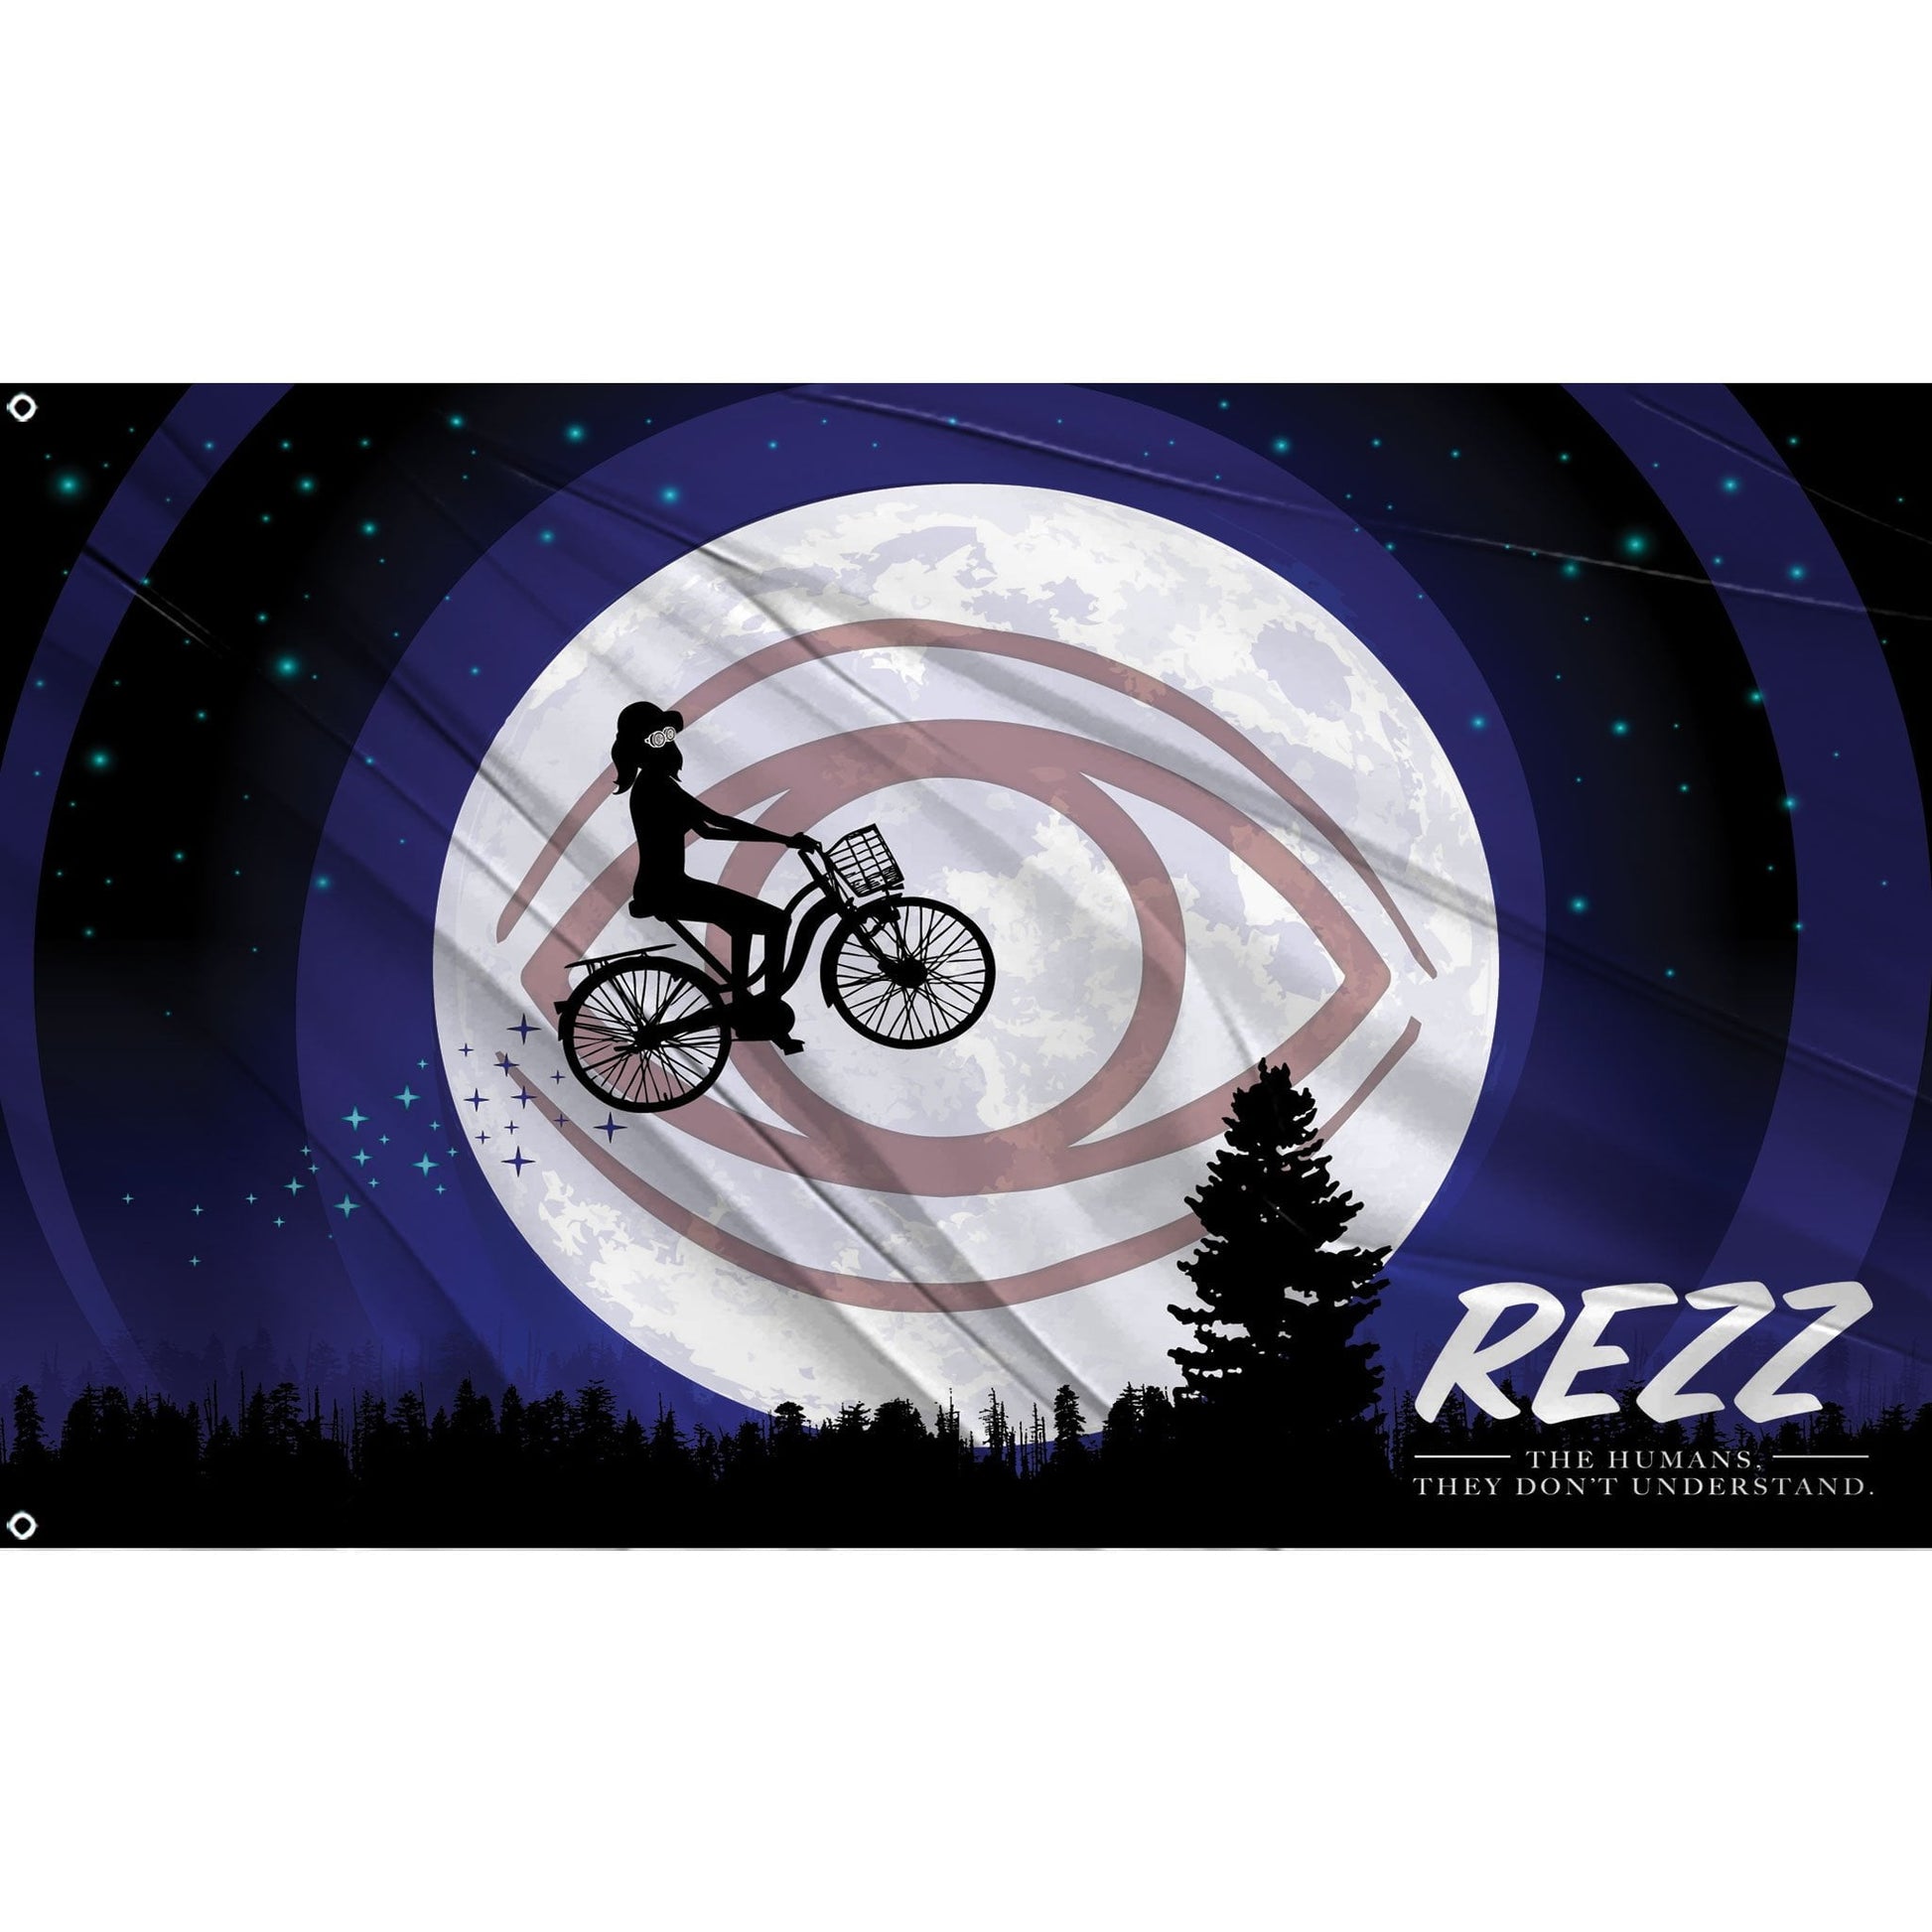 Fest Flags Trippy 1 X 2 Feet / Single Sided Rezz Flag - The Humans Don't Understand